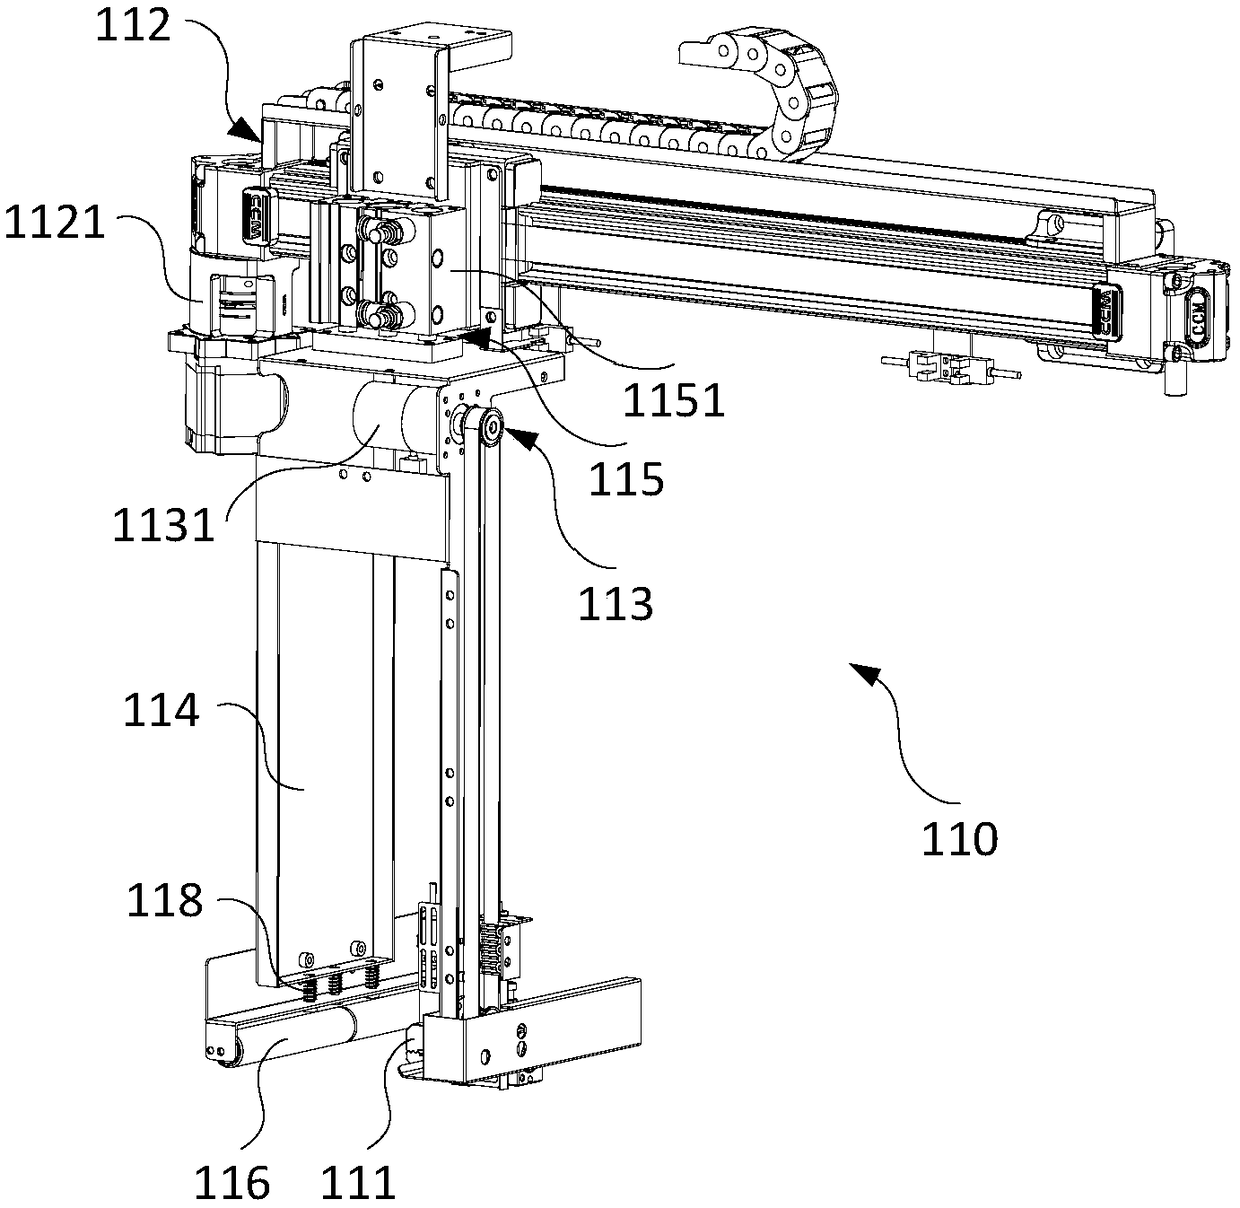 Film tearing mechanism and automatic kitchen system